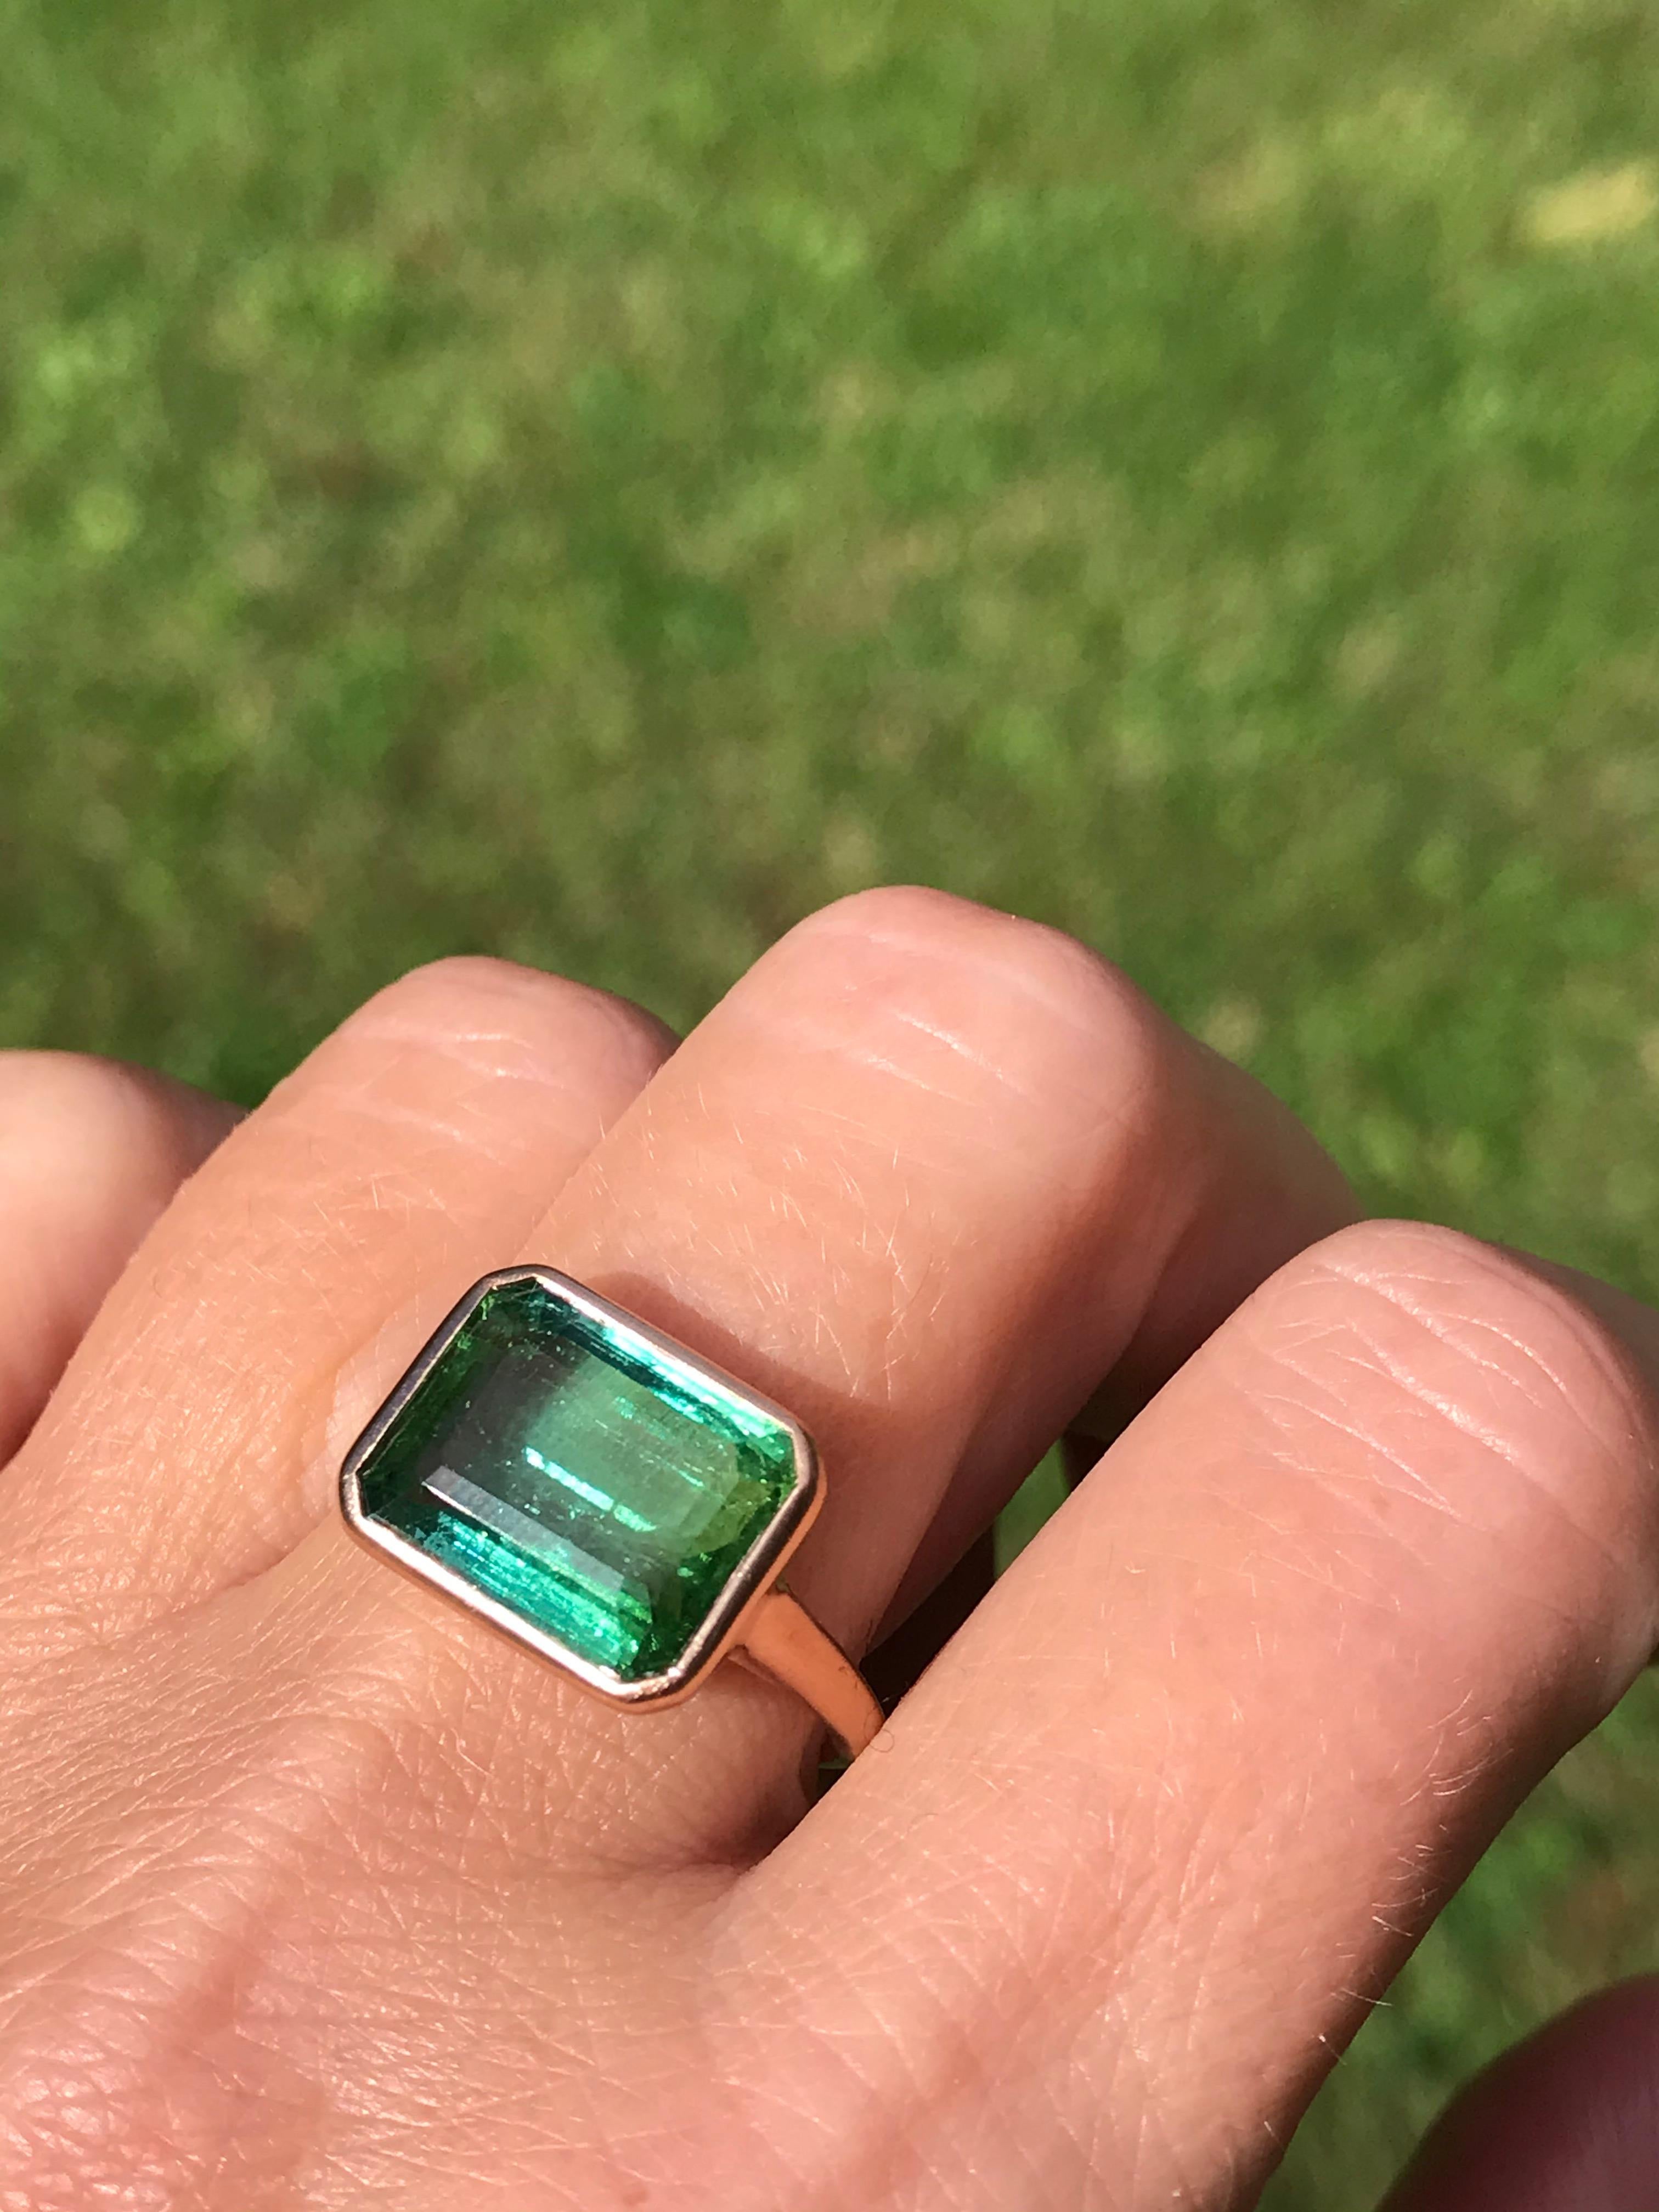 Dalben design  18k rose gold matte finishing ring with a  6,62 carat bezel-set rectangular faceted cut green Tourmaline. 
Ring size 7 1/4 USA - EU 55 re-sizable to most finger sizes. 
Bezel stone dimensions :
height 11,5 mm
width 14,5 mm
The ring